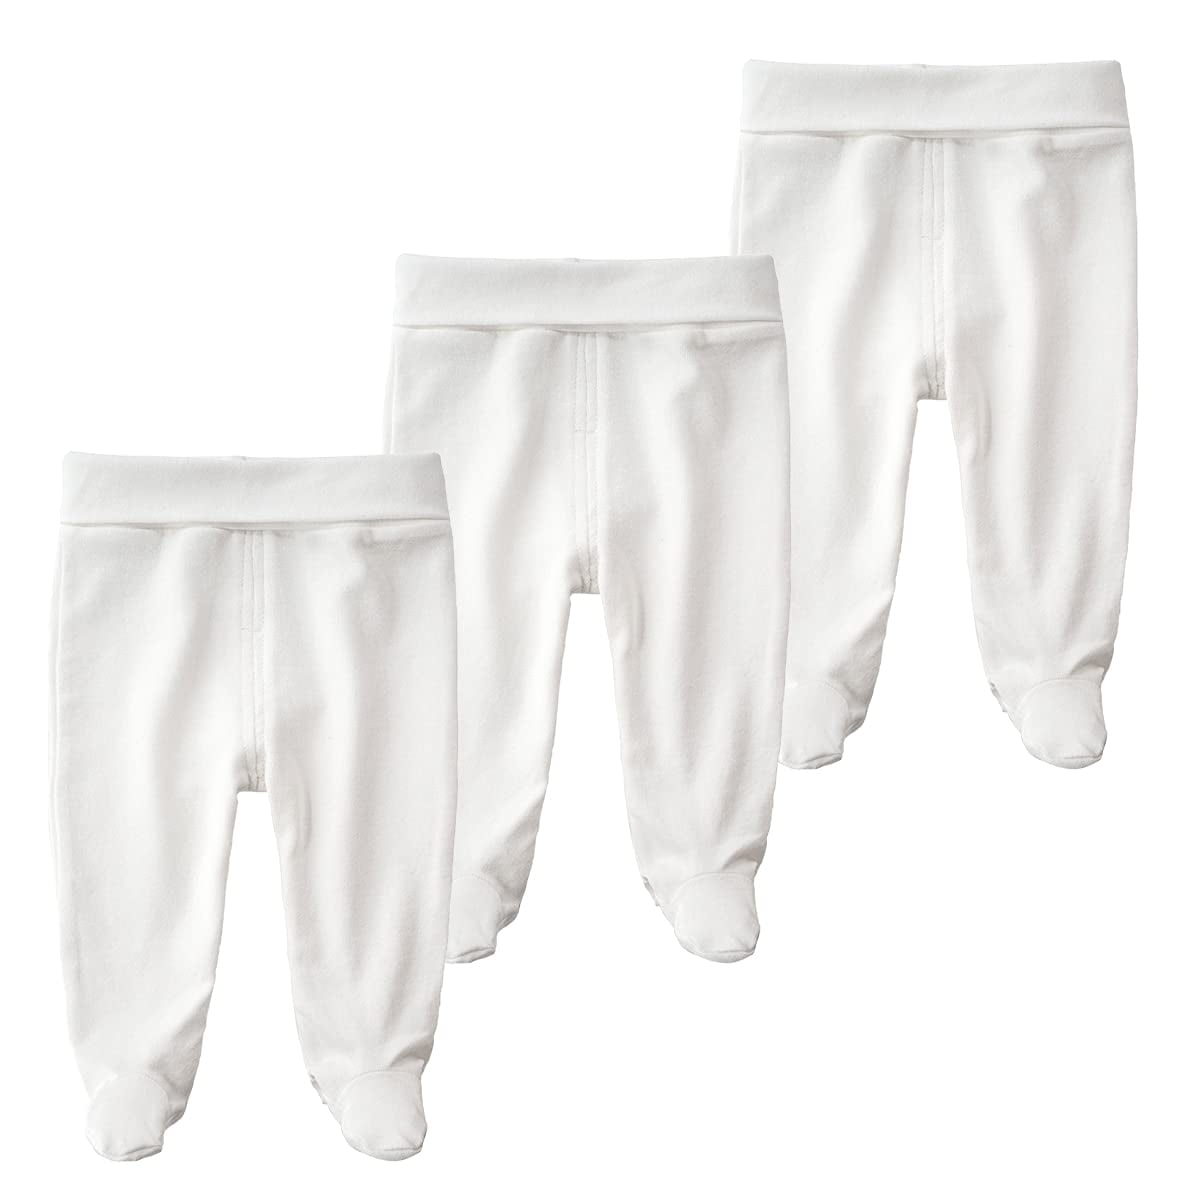 Knitted adjustable baby pants — Keepers Knitwear